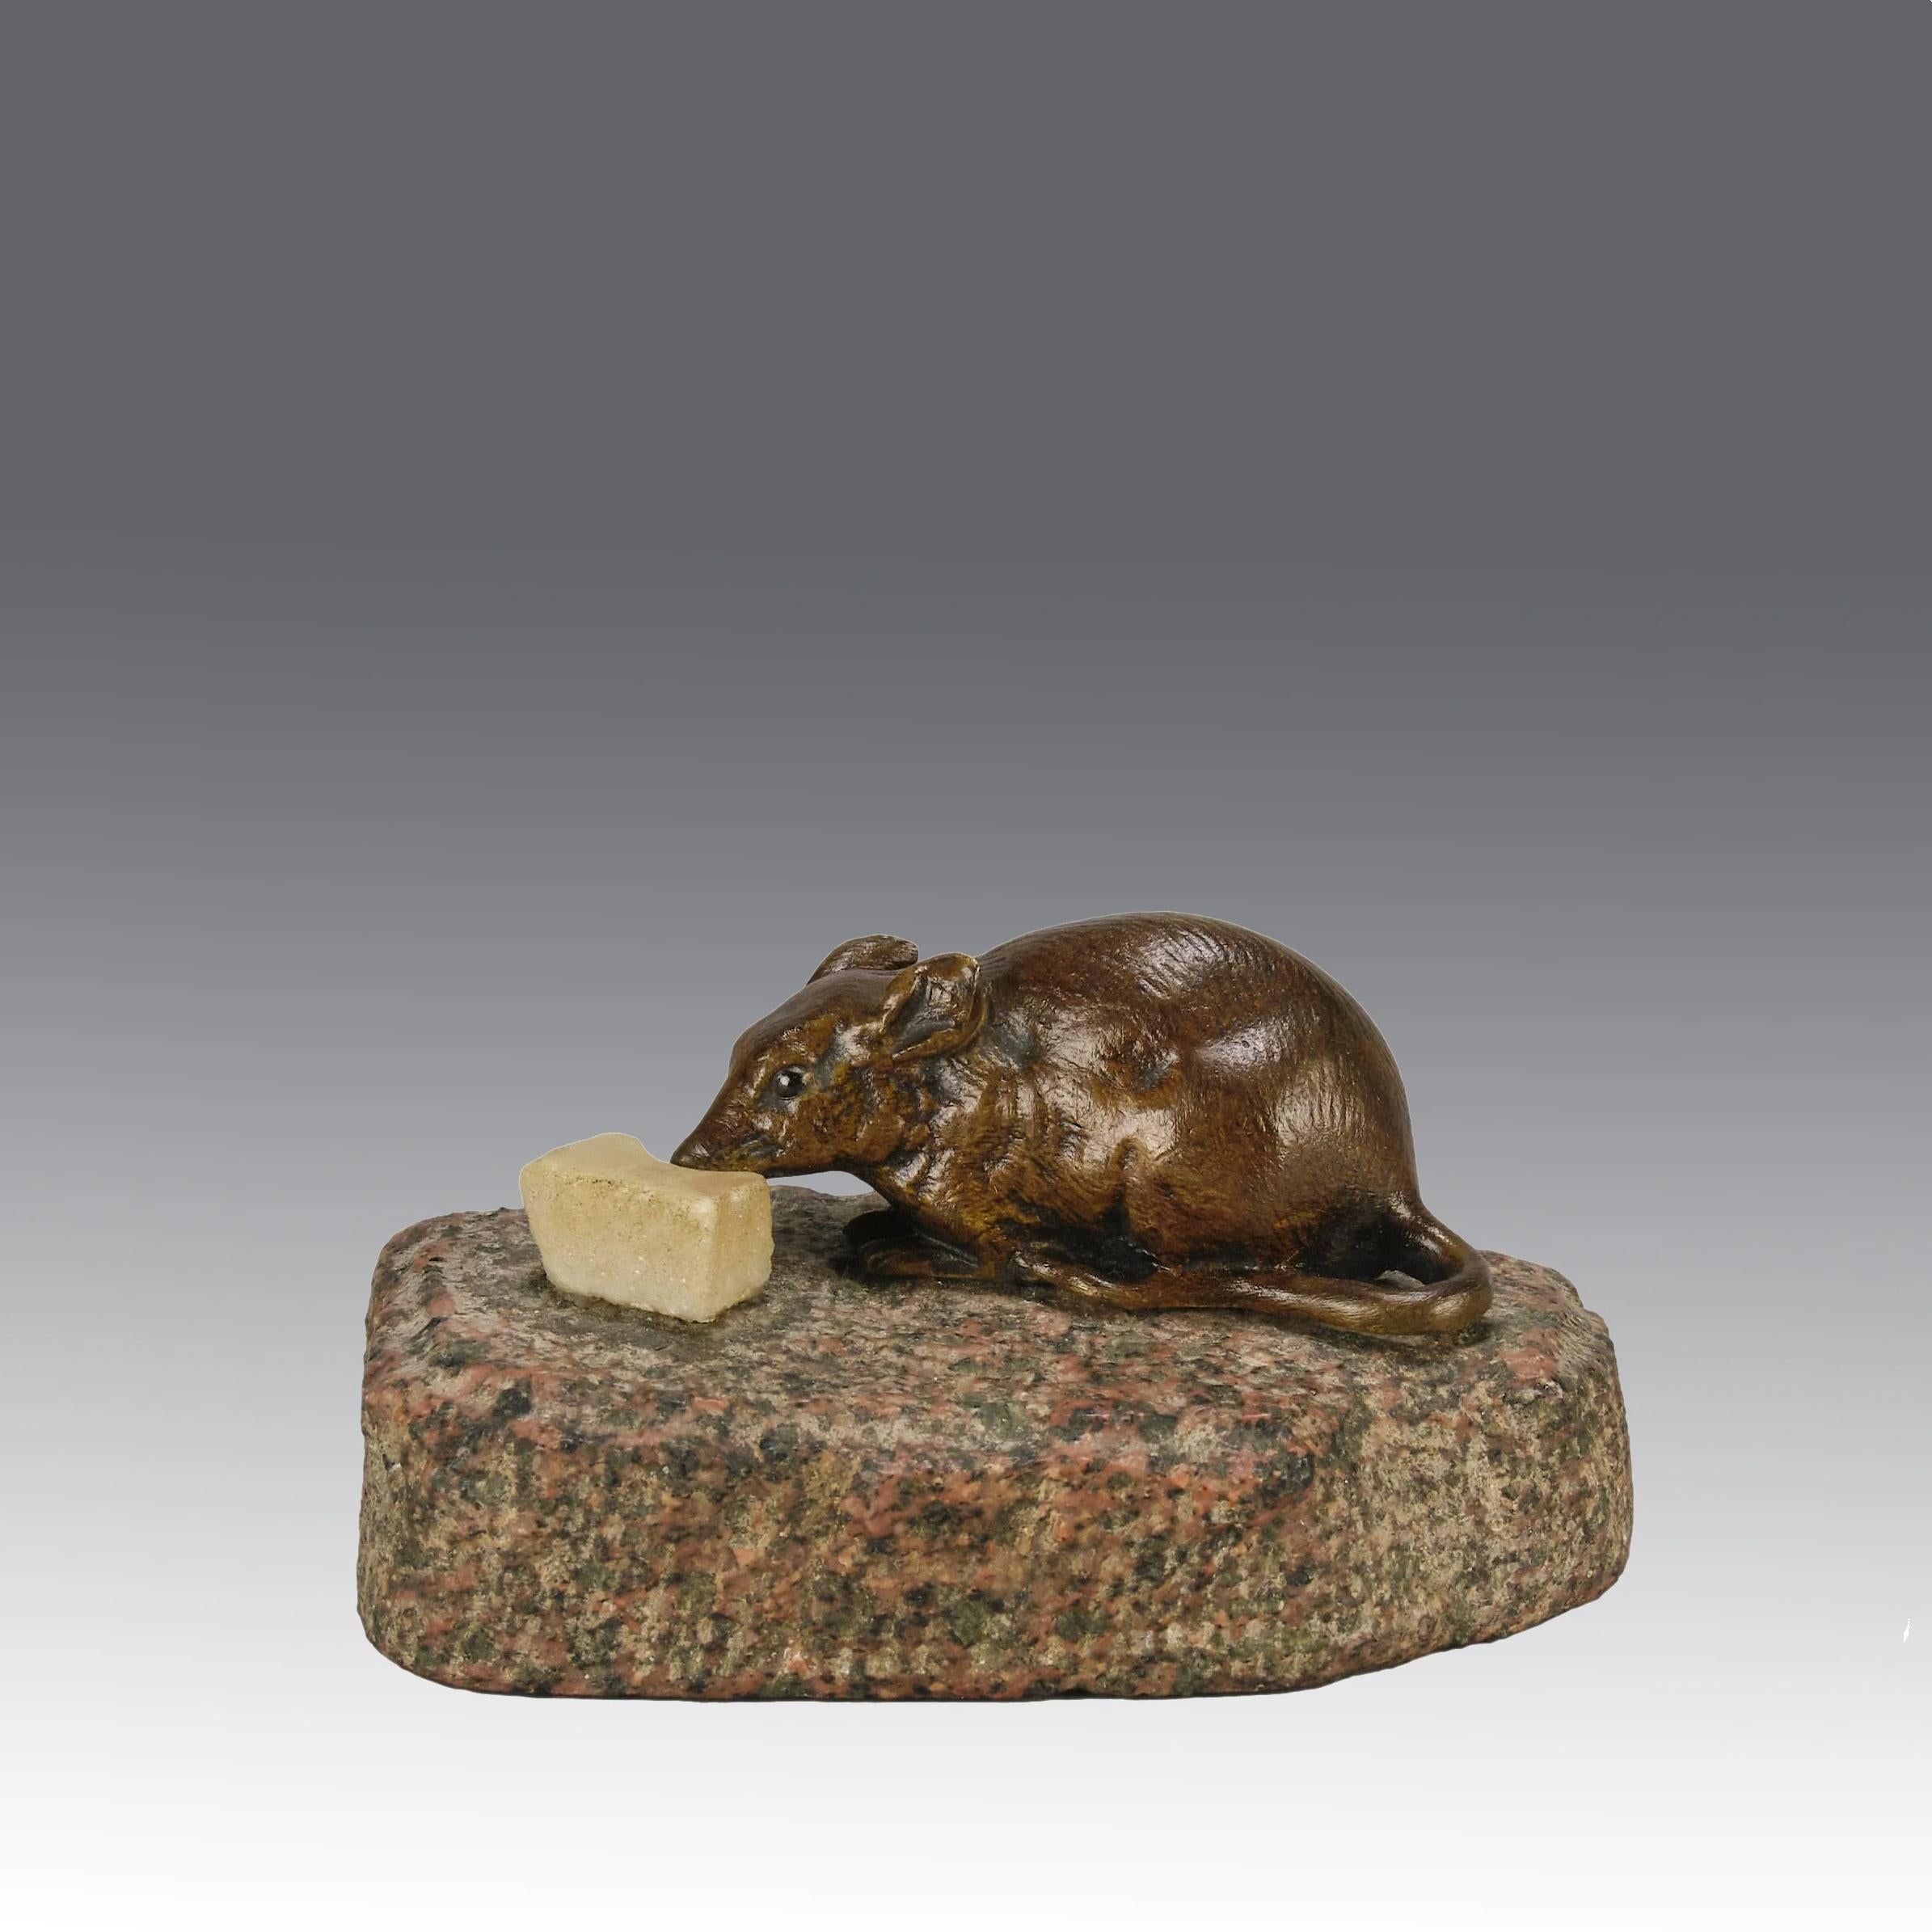 Charming late 19th century French animalier bronze study of a mouse nibbling some cheese depicted in cream marble. The bronze study exhibiting excellent hand chased surface detail and good colour, raised on a rough hewn granite base

ADDITIONAL